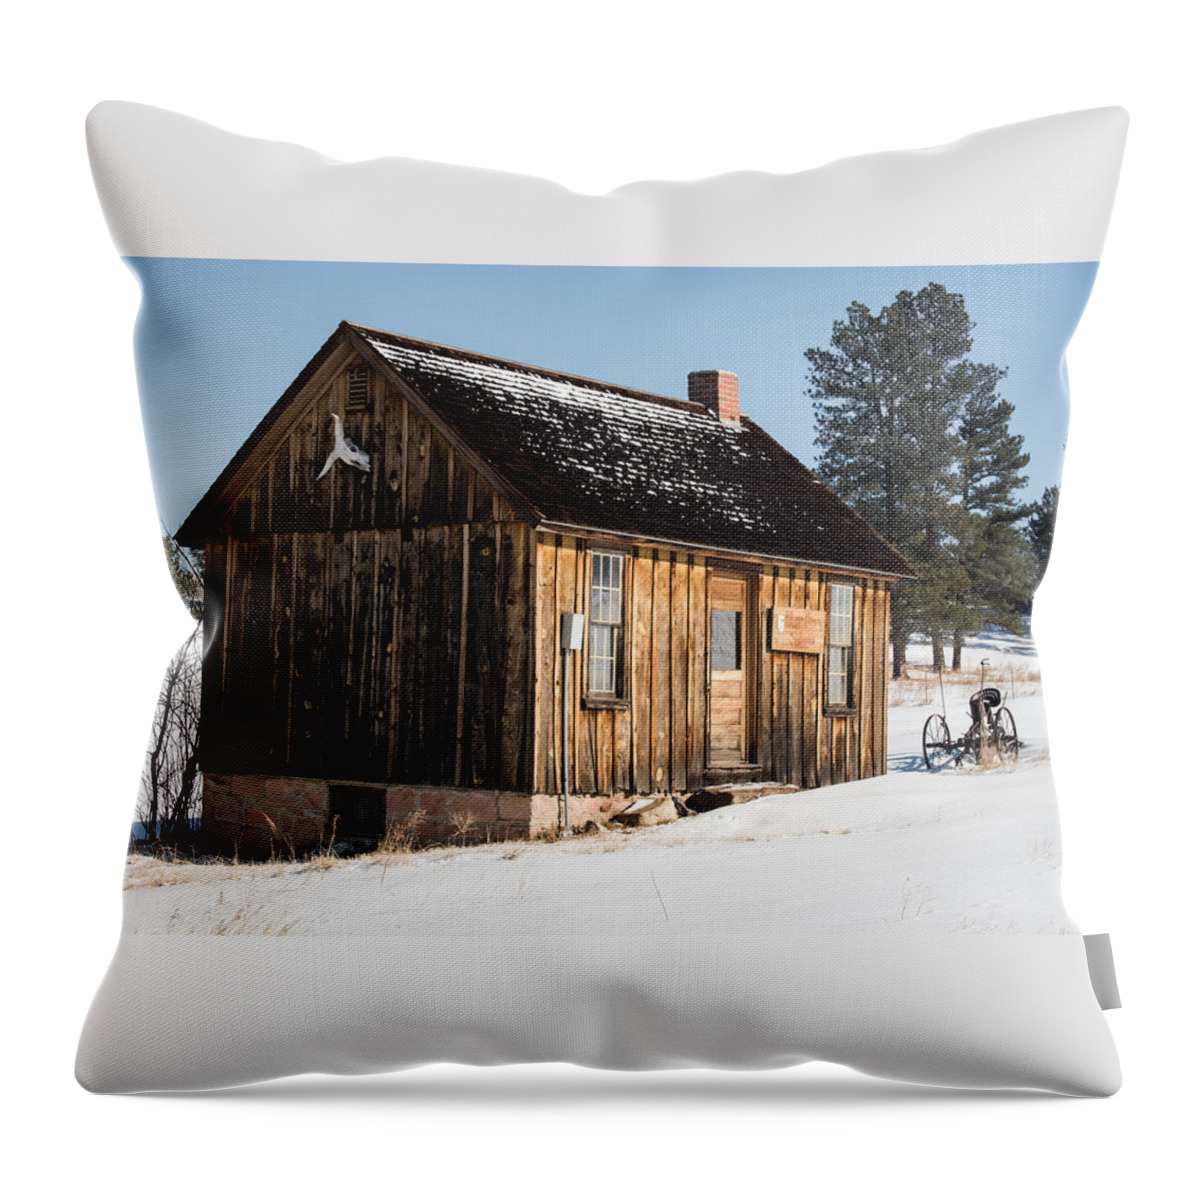 Abandoned Throw Pillow featuring the photograph Cabin In The Snow by Art Atkins